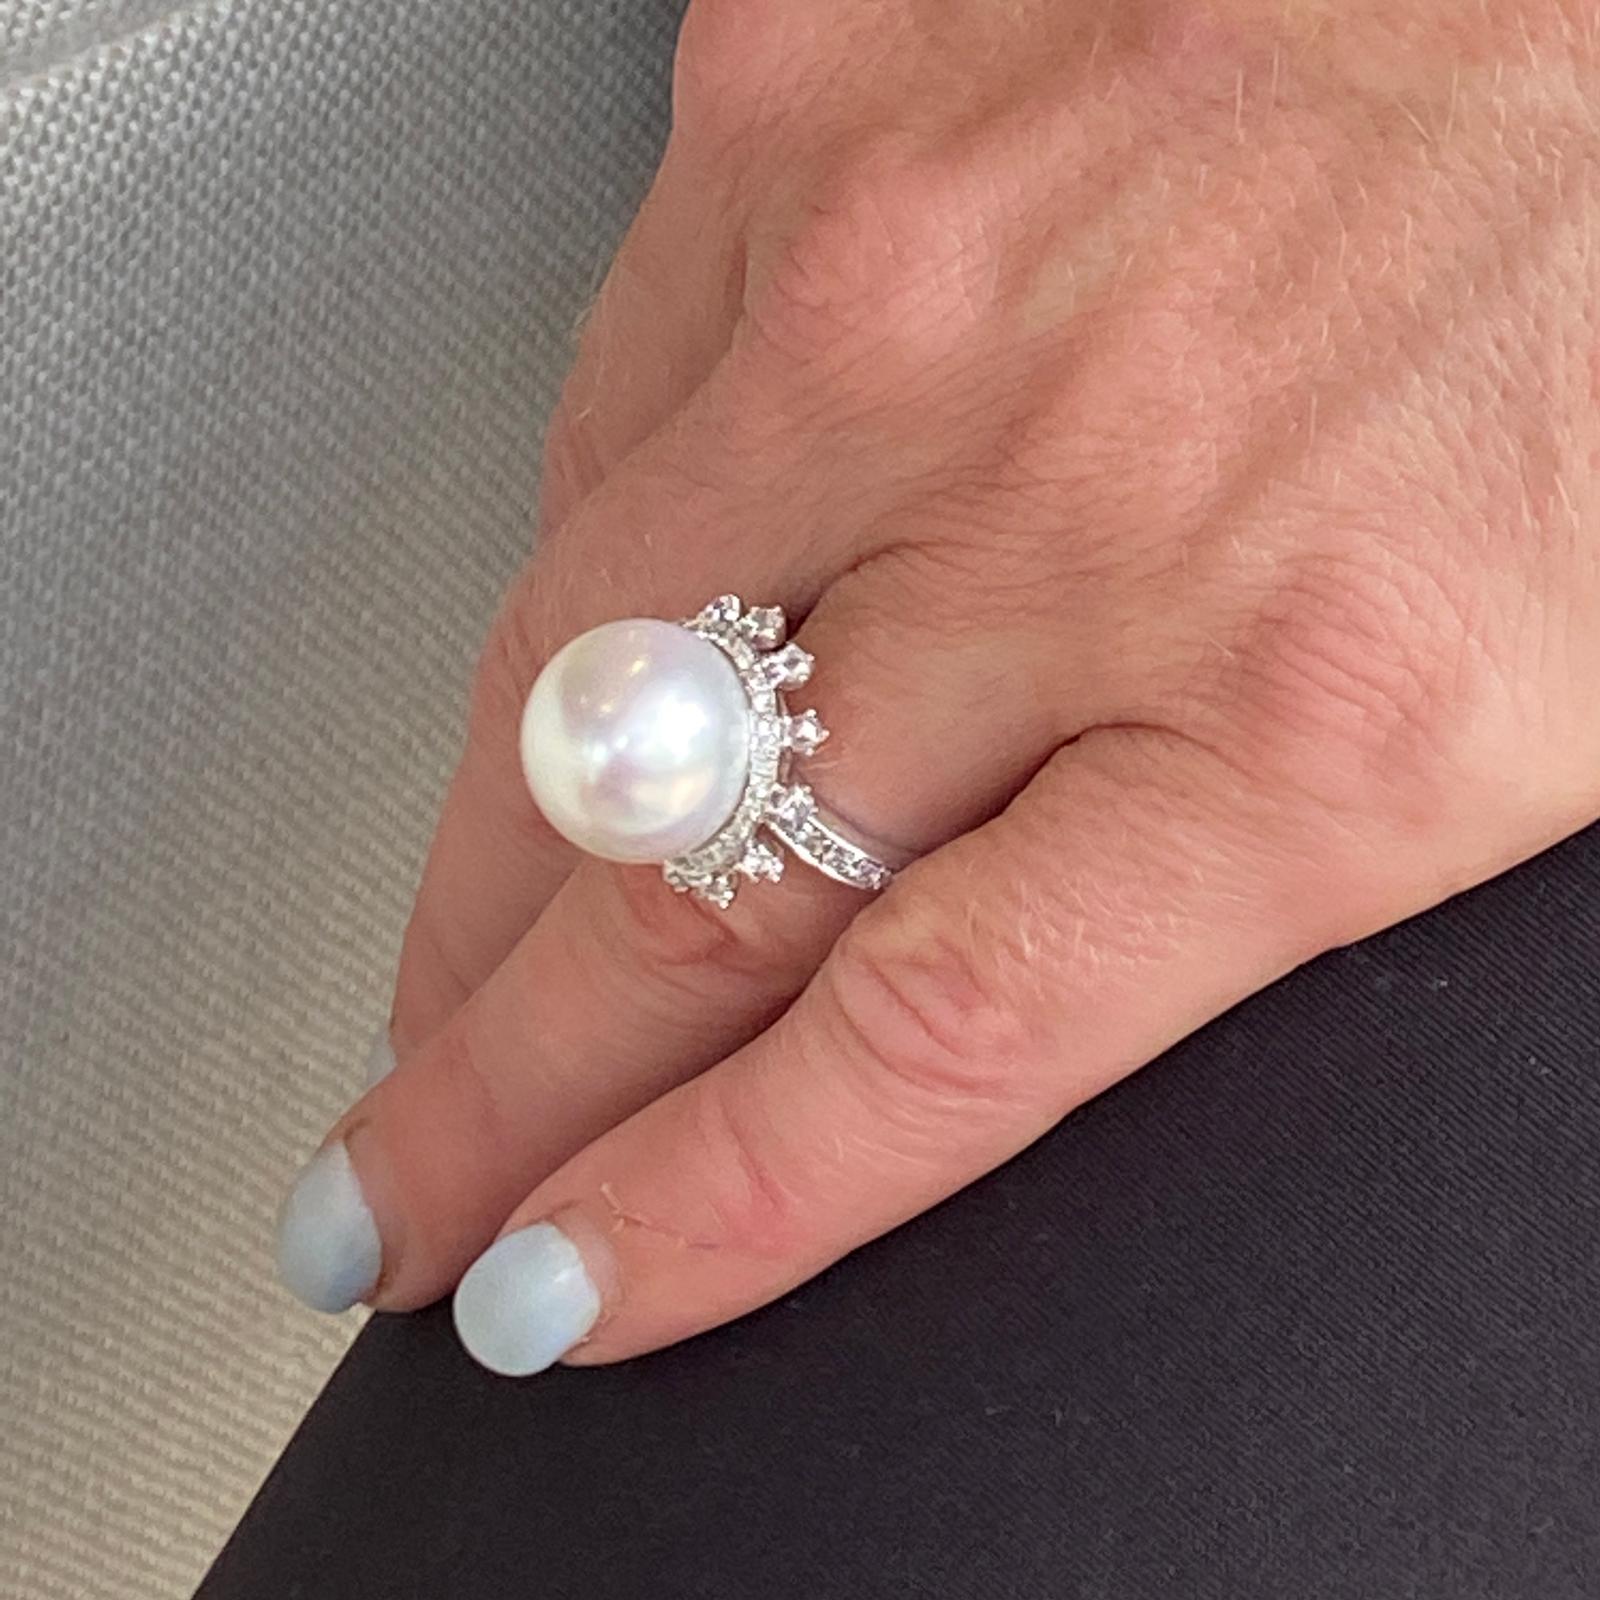 Beautiful South Sea Pearl and diamond ring fashioned in 18 karat white gold. The 14.5mm South Sea Pearl is surrounded by diamonds weighing 1.00 carat total weight and graded G-H color and SI clarity. The ring is currently sie 5.5 (can be sized). 